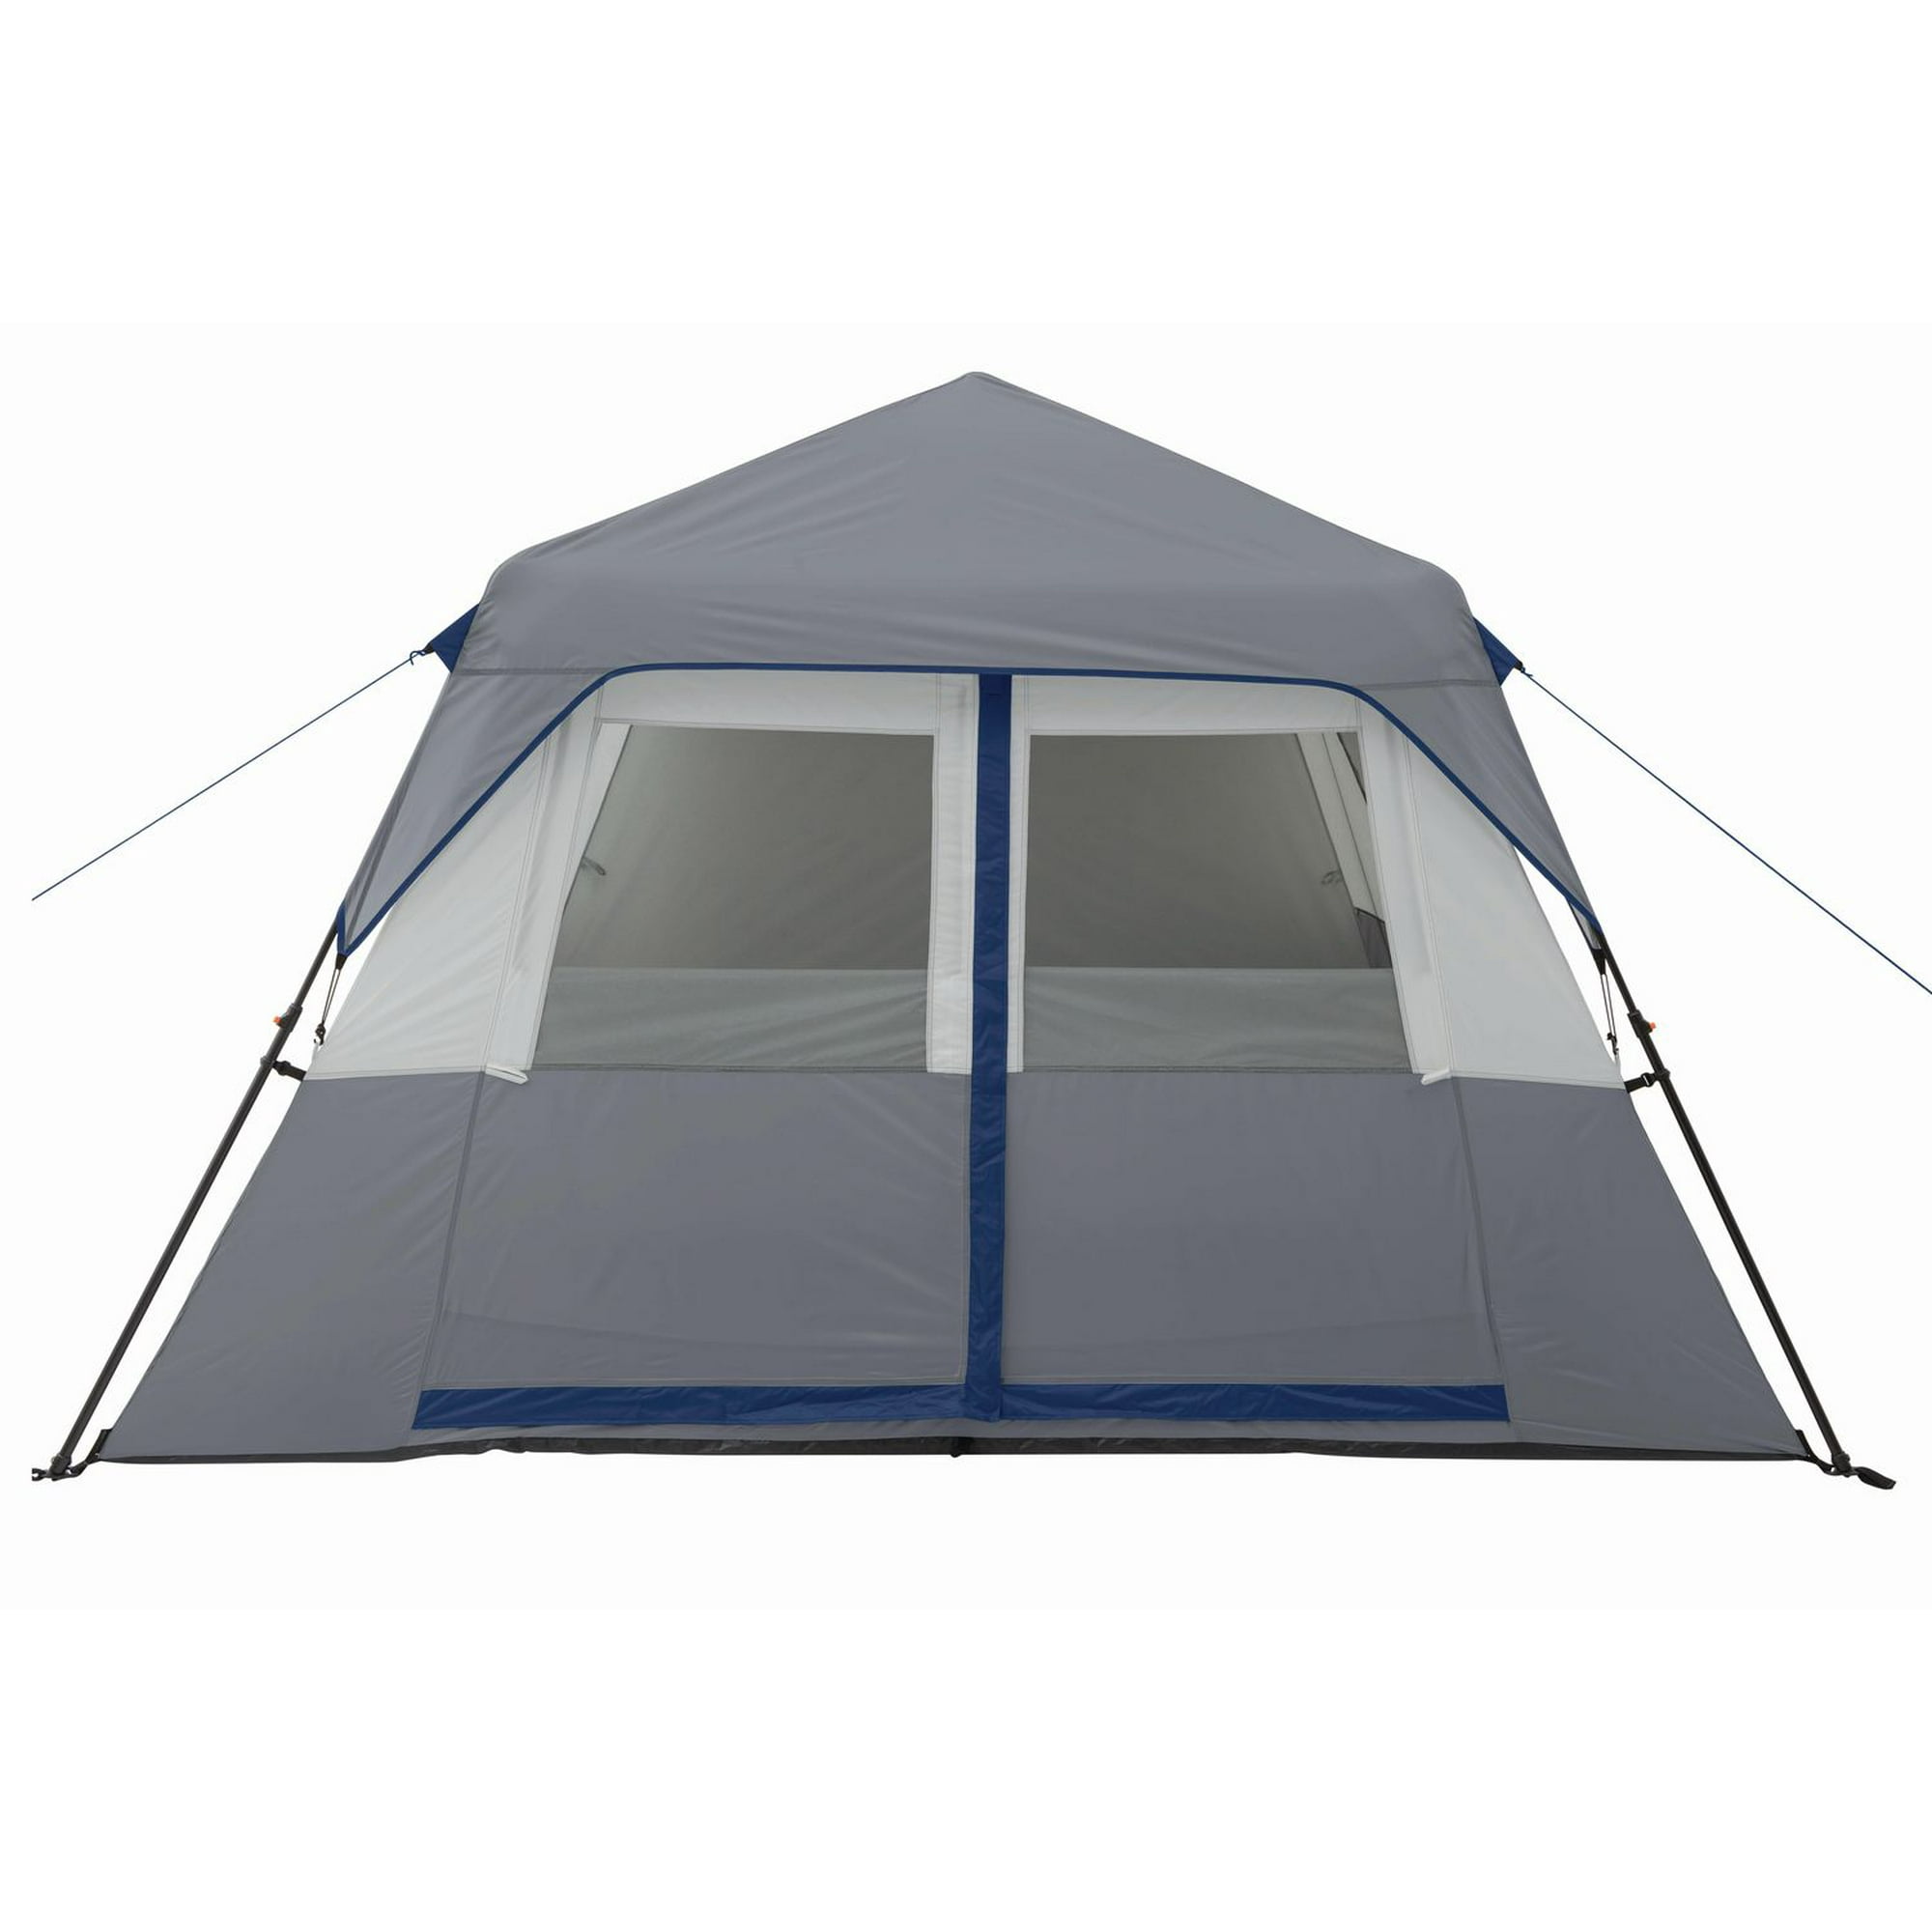 Core Equipment 6-Person Instant Cabin Performance Tent